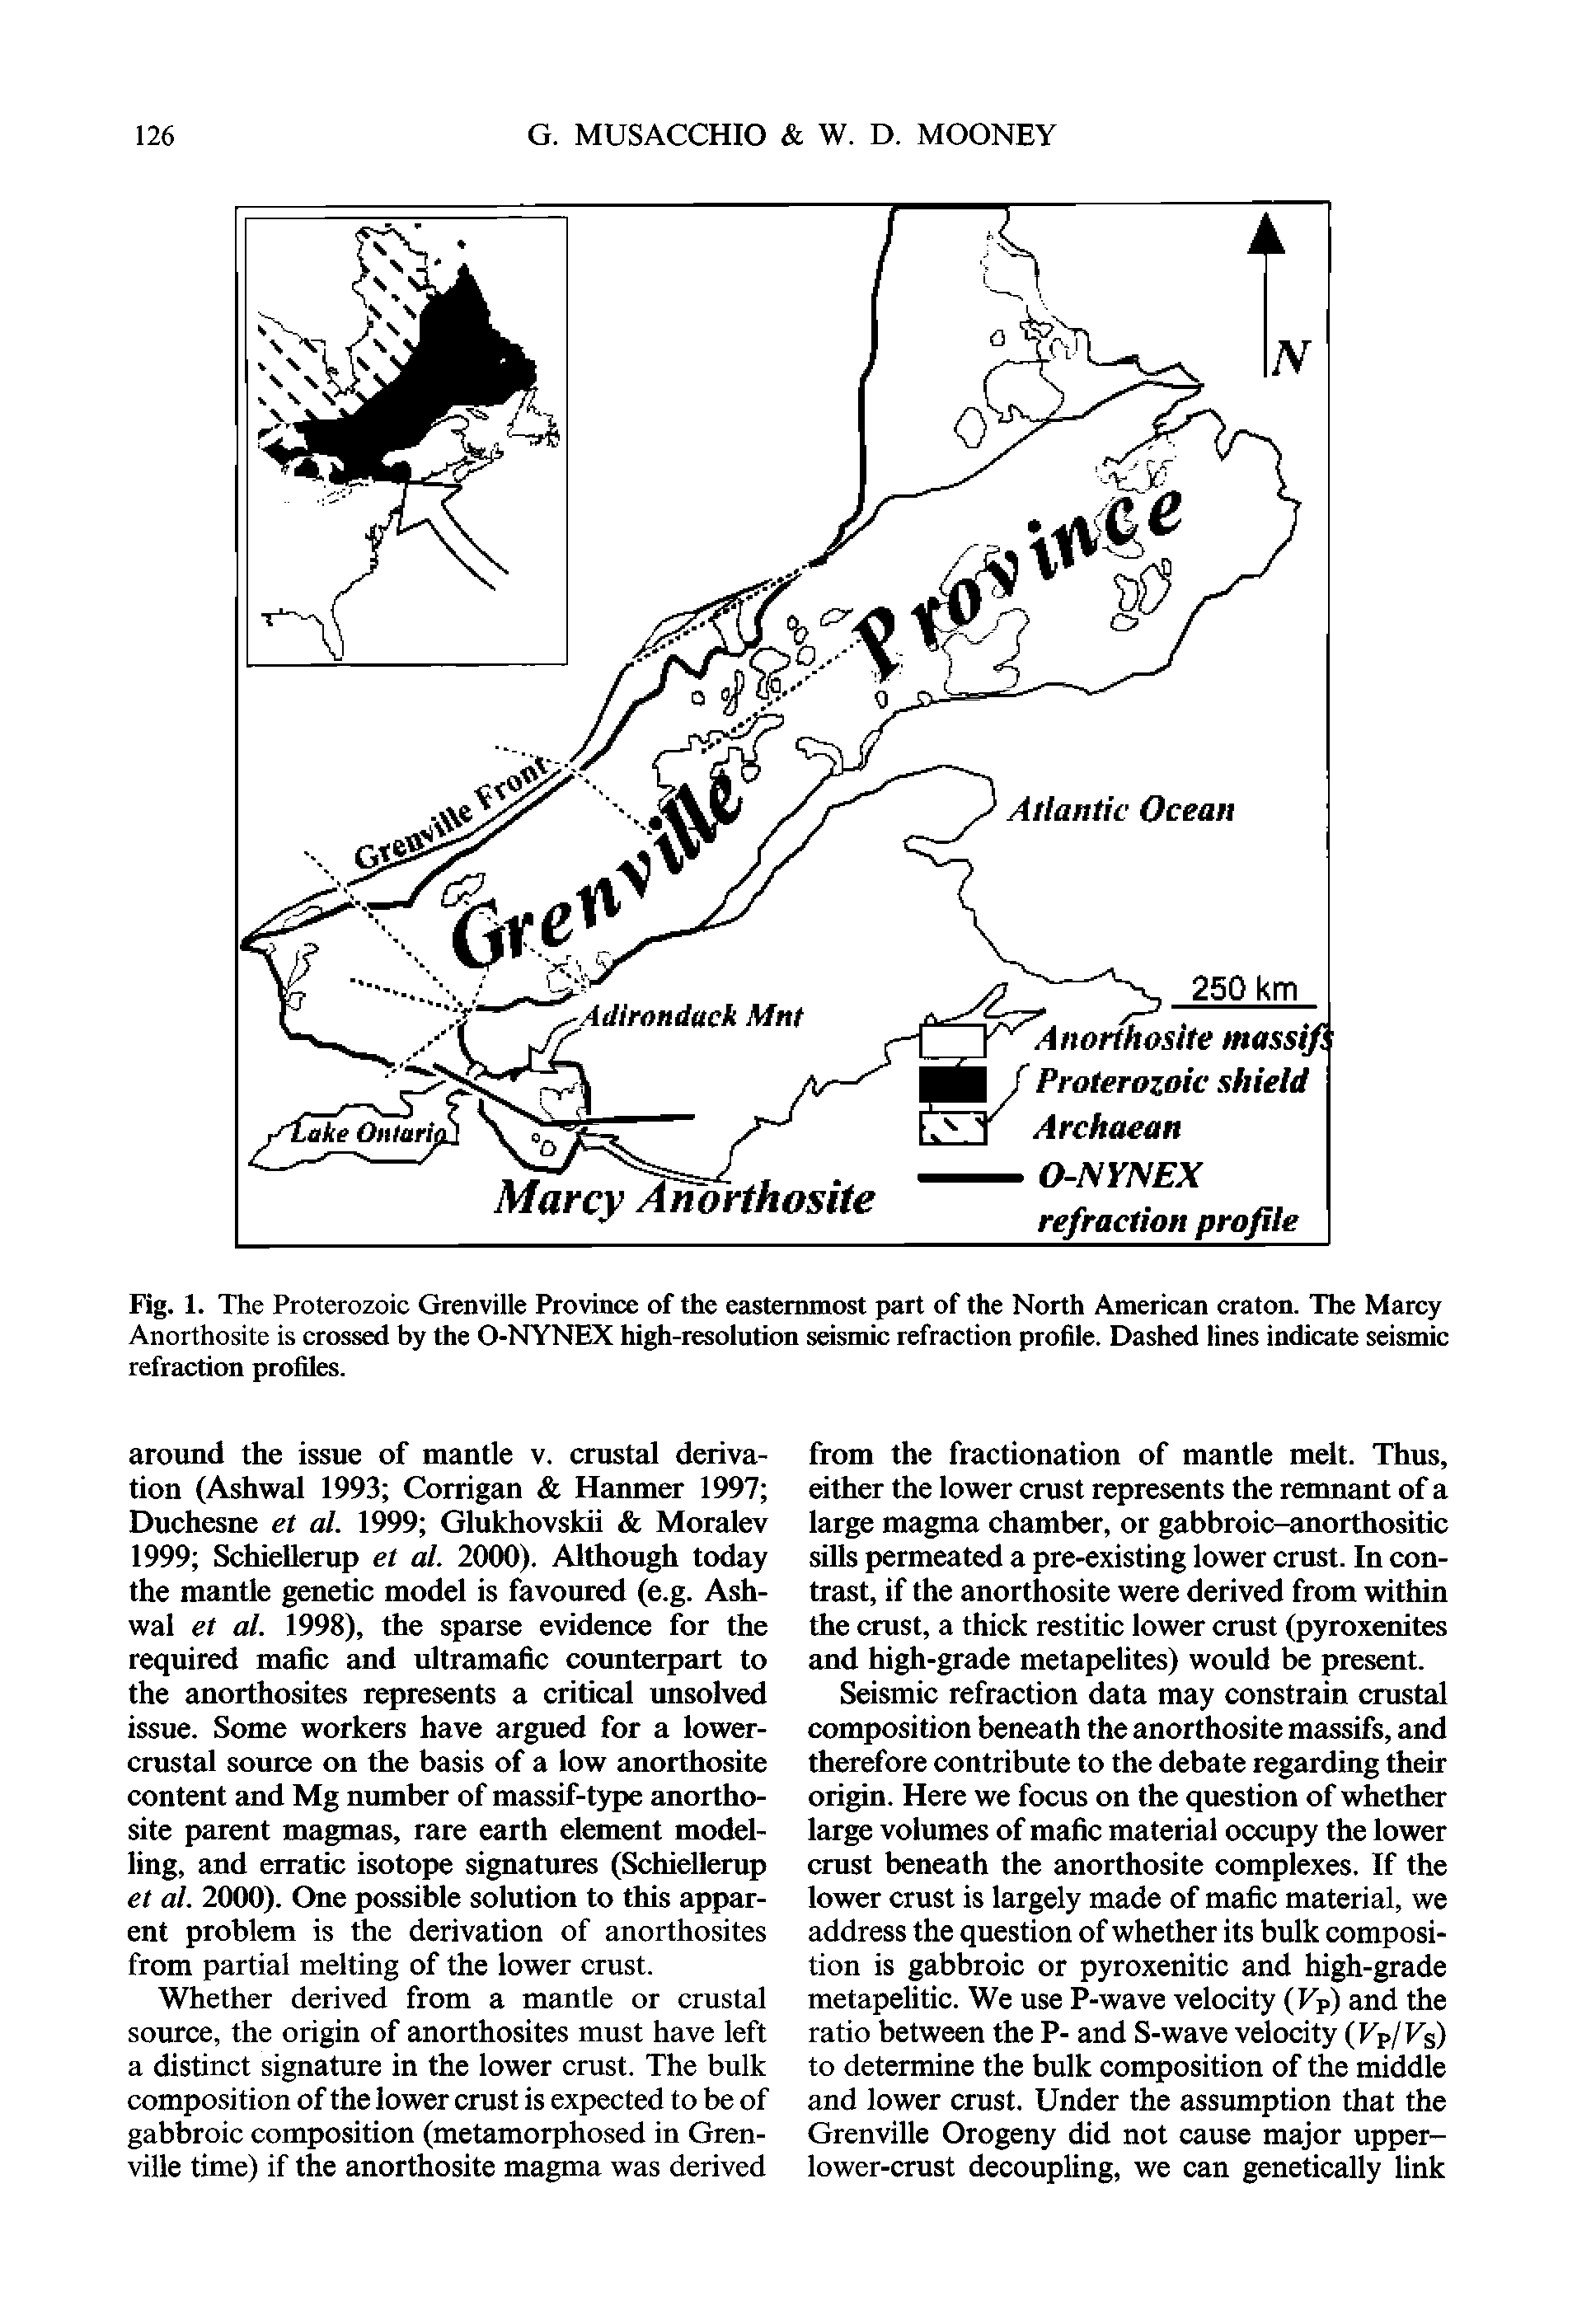 Fig. 1. The Proterozoic Grenville Province of the easternmost part of the North American craton. The Marcy Anorthosite is crossed by the O-NYNEX high-resolution seismic refraction profile. Dashed lines indicate seismic refraction profiles.